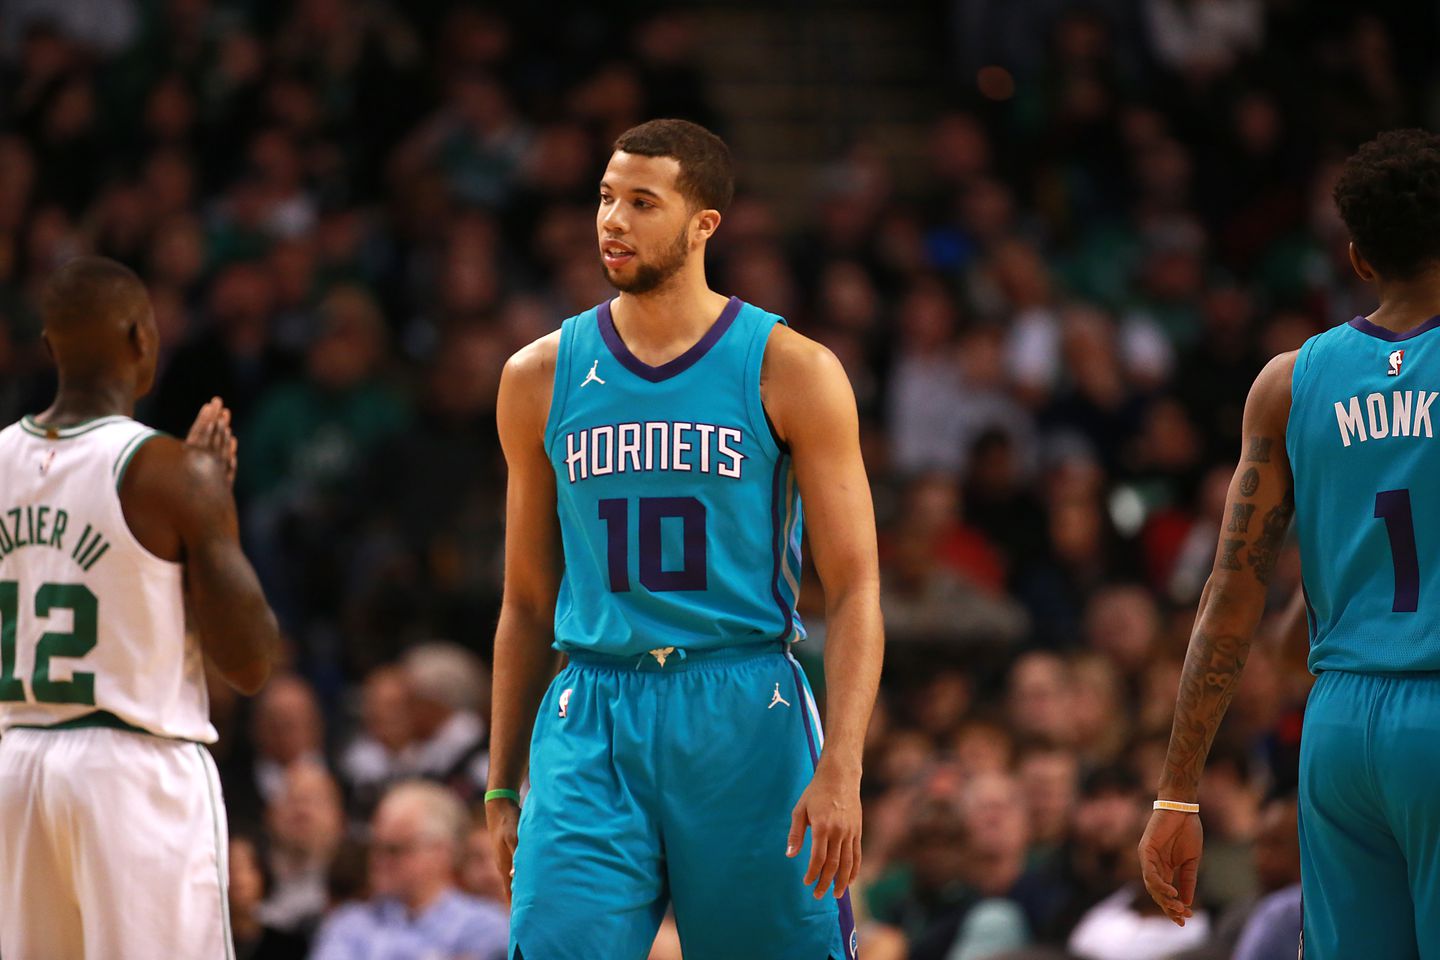 Hornets' Michael Carter-Williams: 'I've been through a lot' - The ...